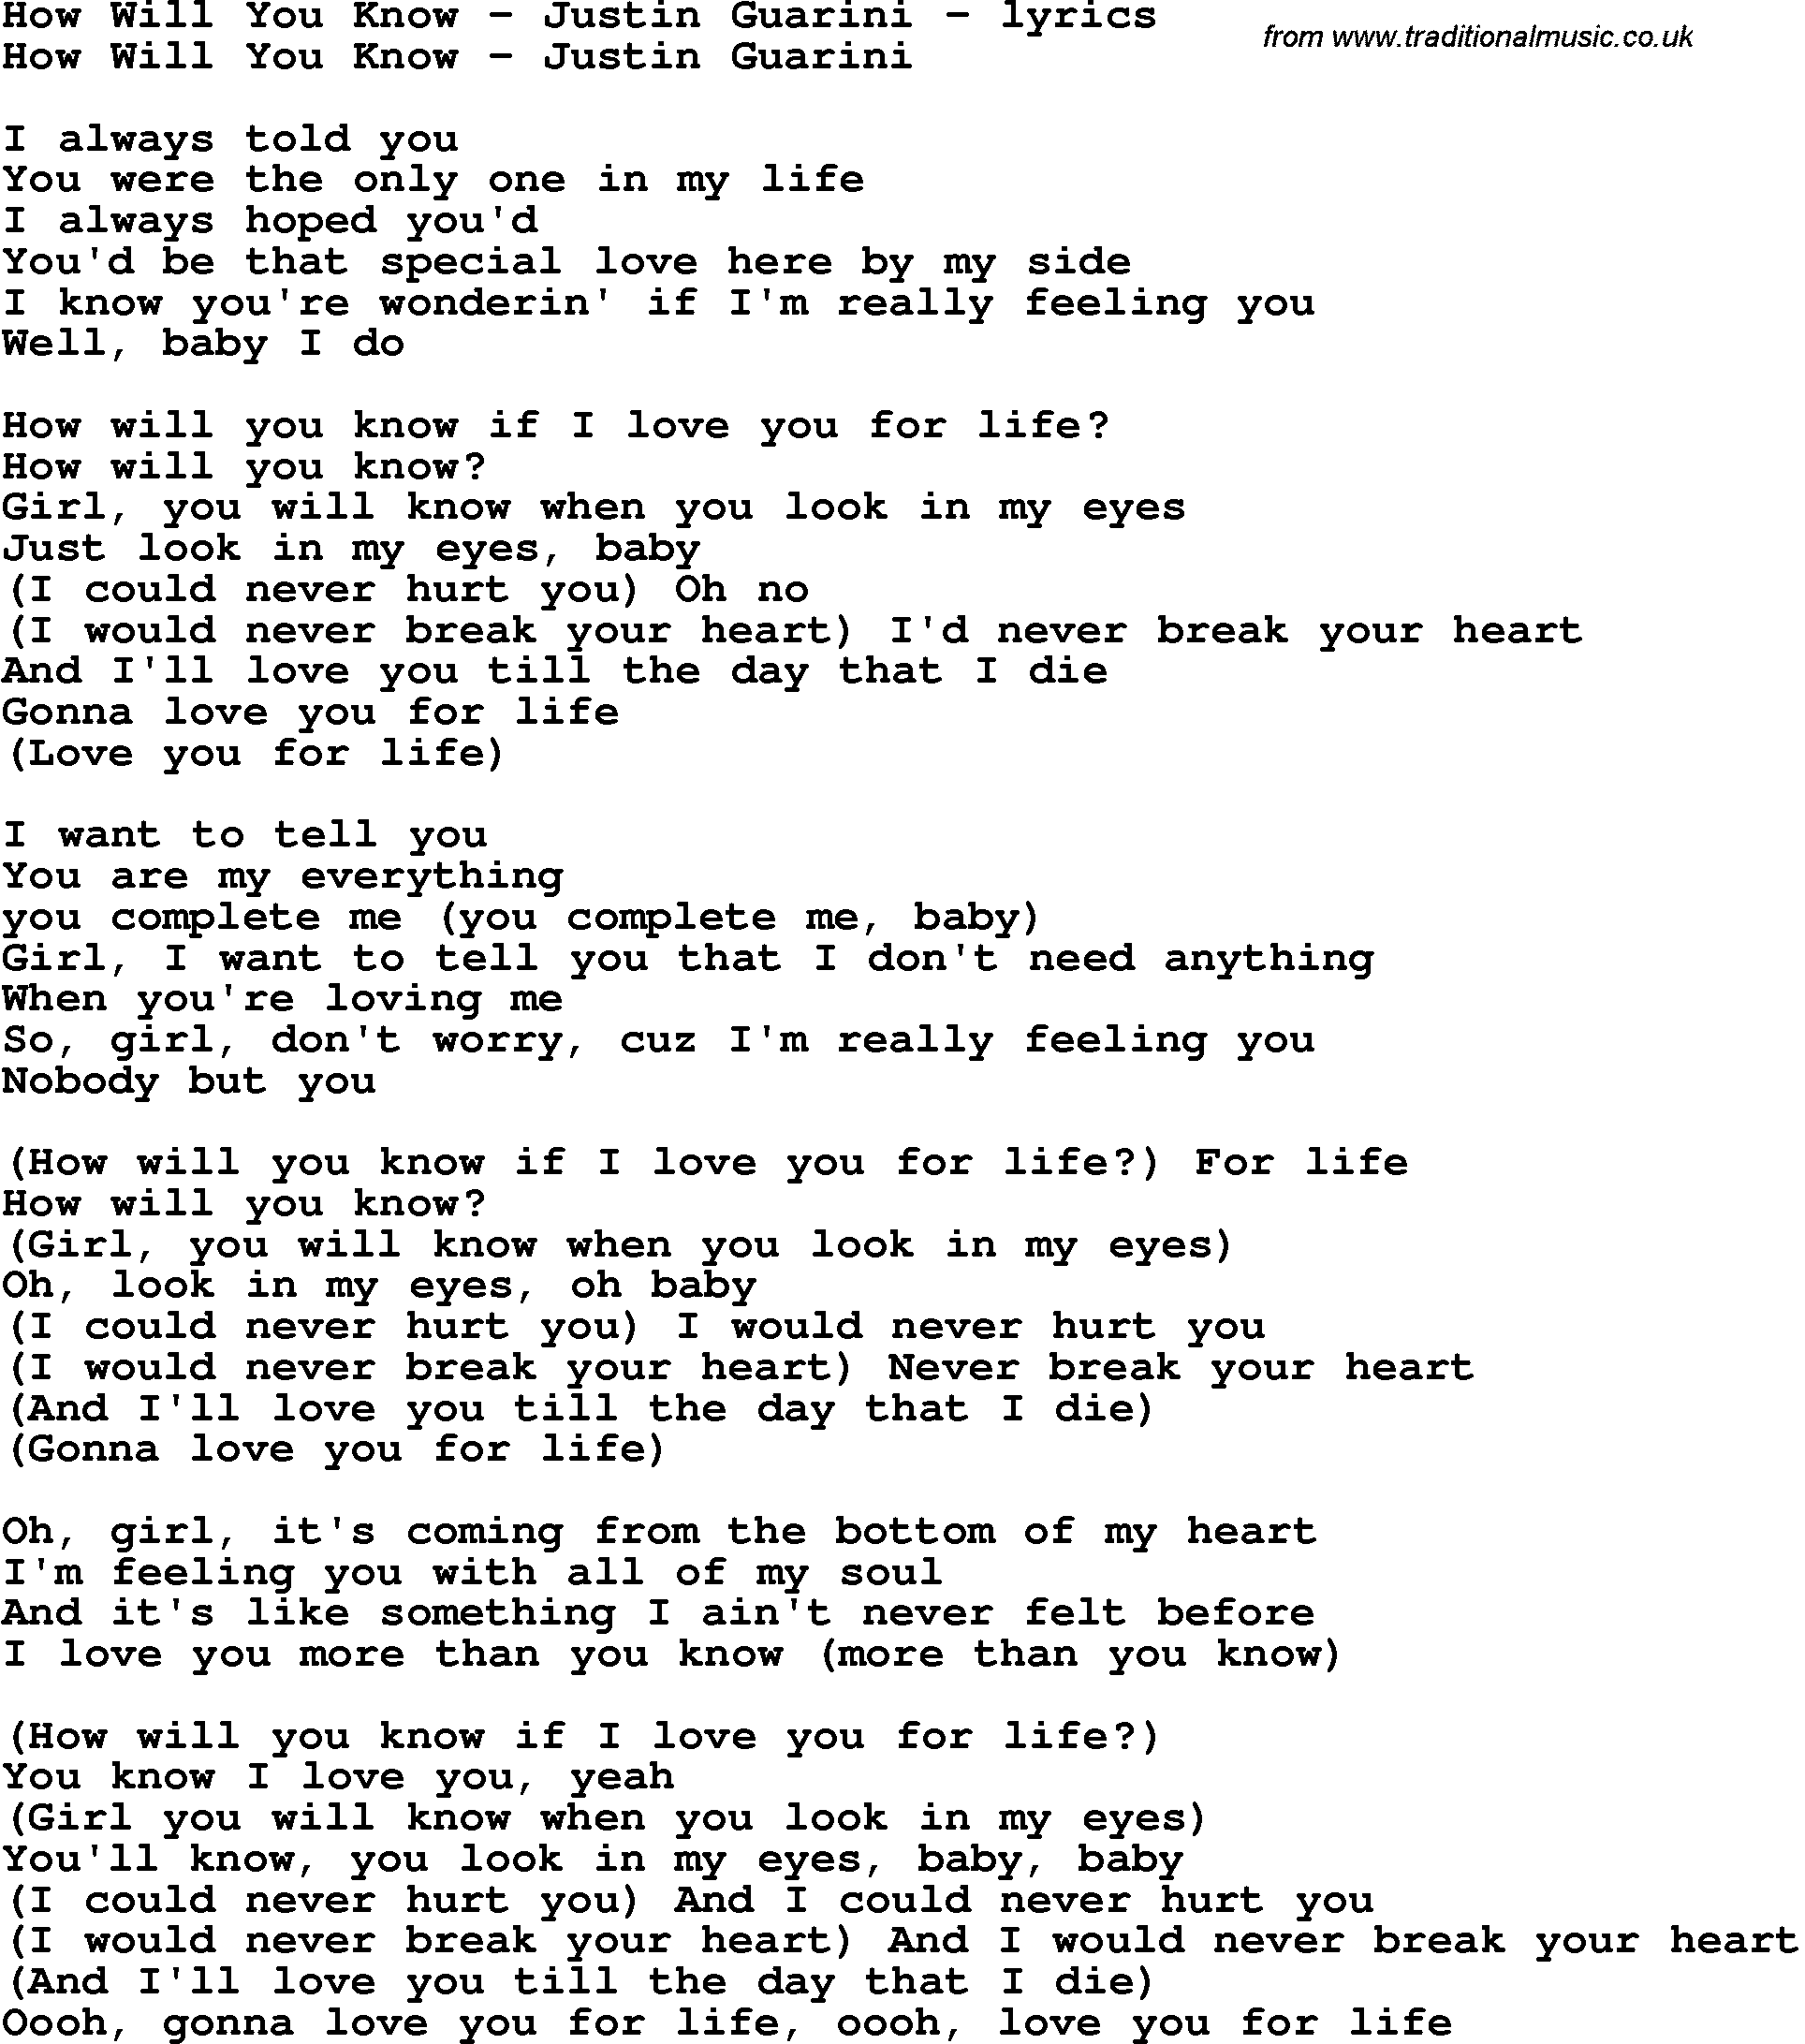 Love Song Lyrics for: How Will You Know - Justin Guarini